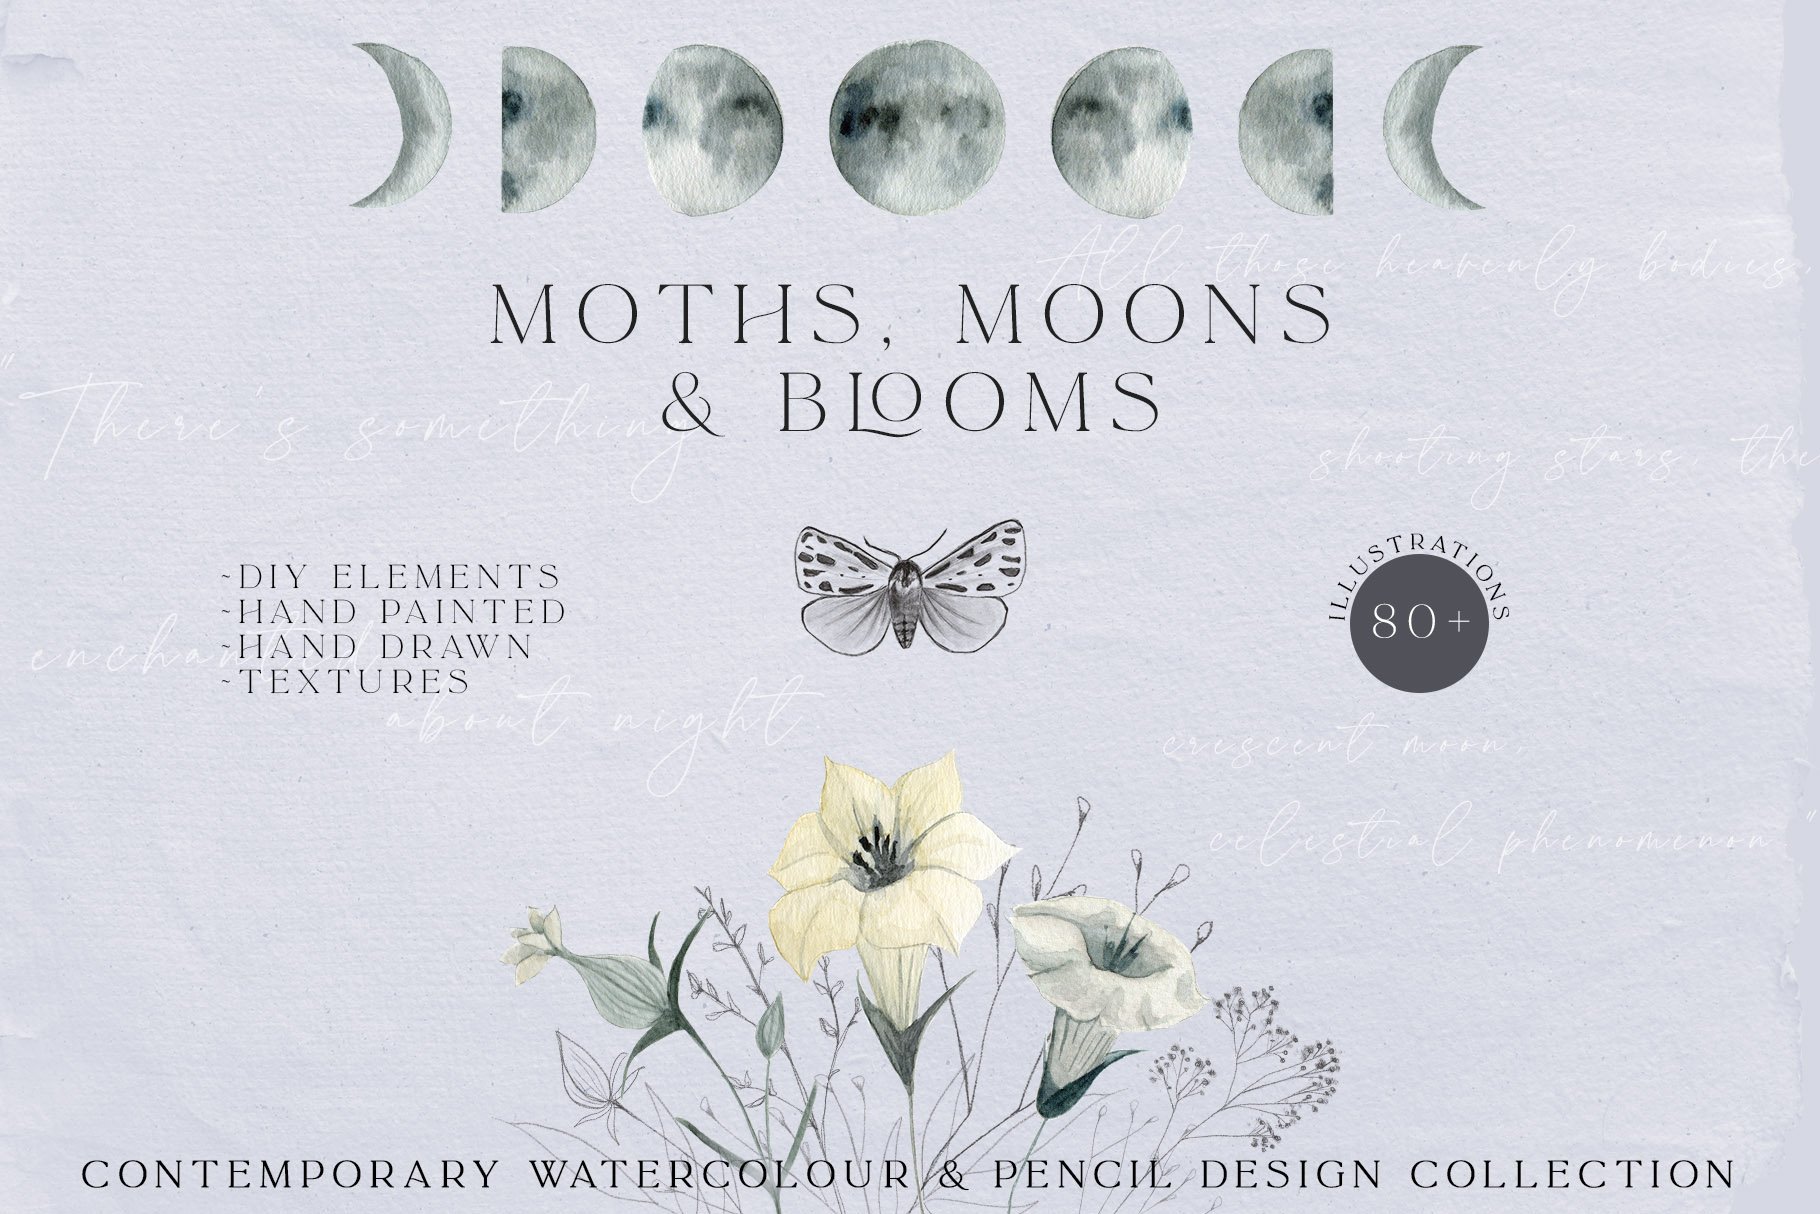 MOTHS, MOONS & BLOOMS watercolor set cover image.